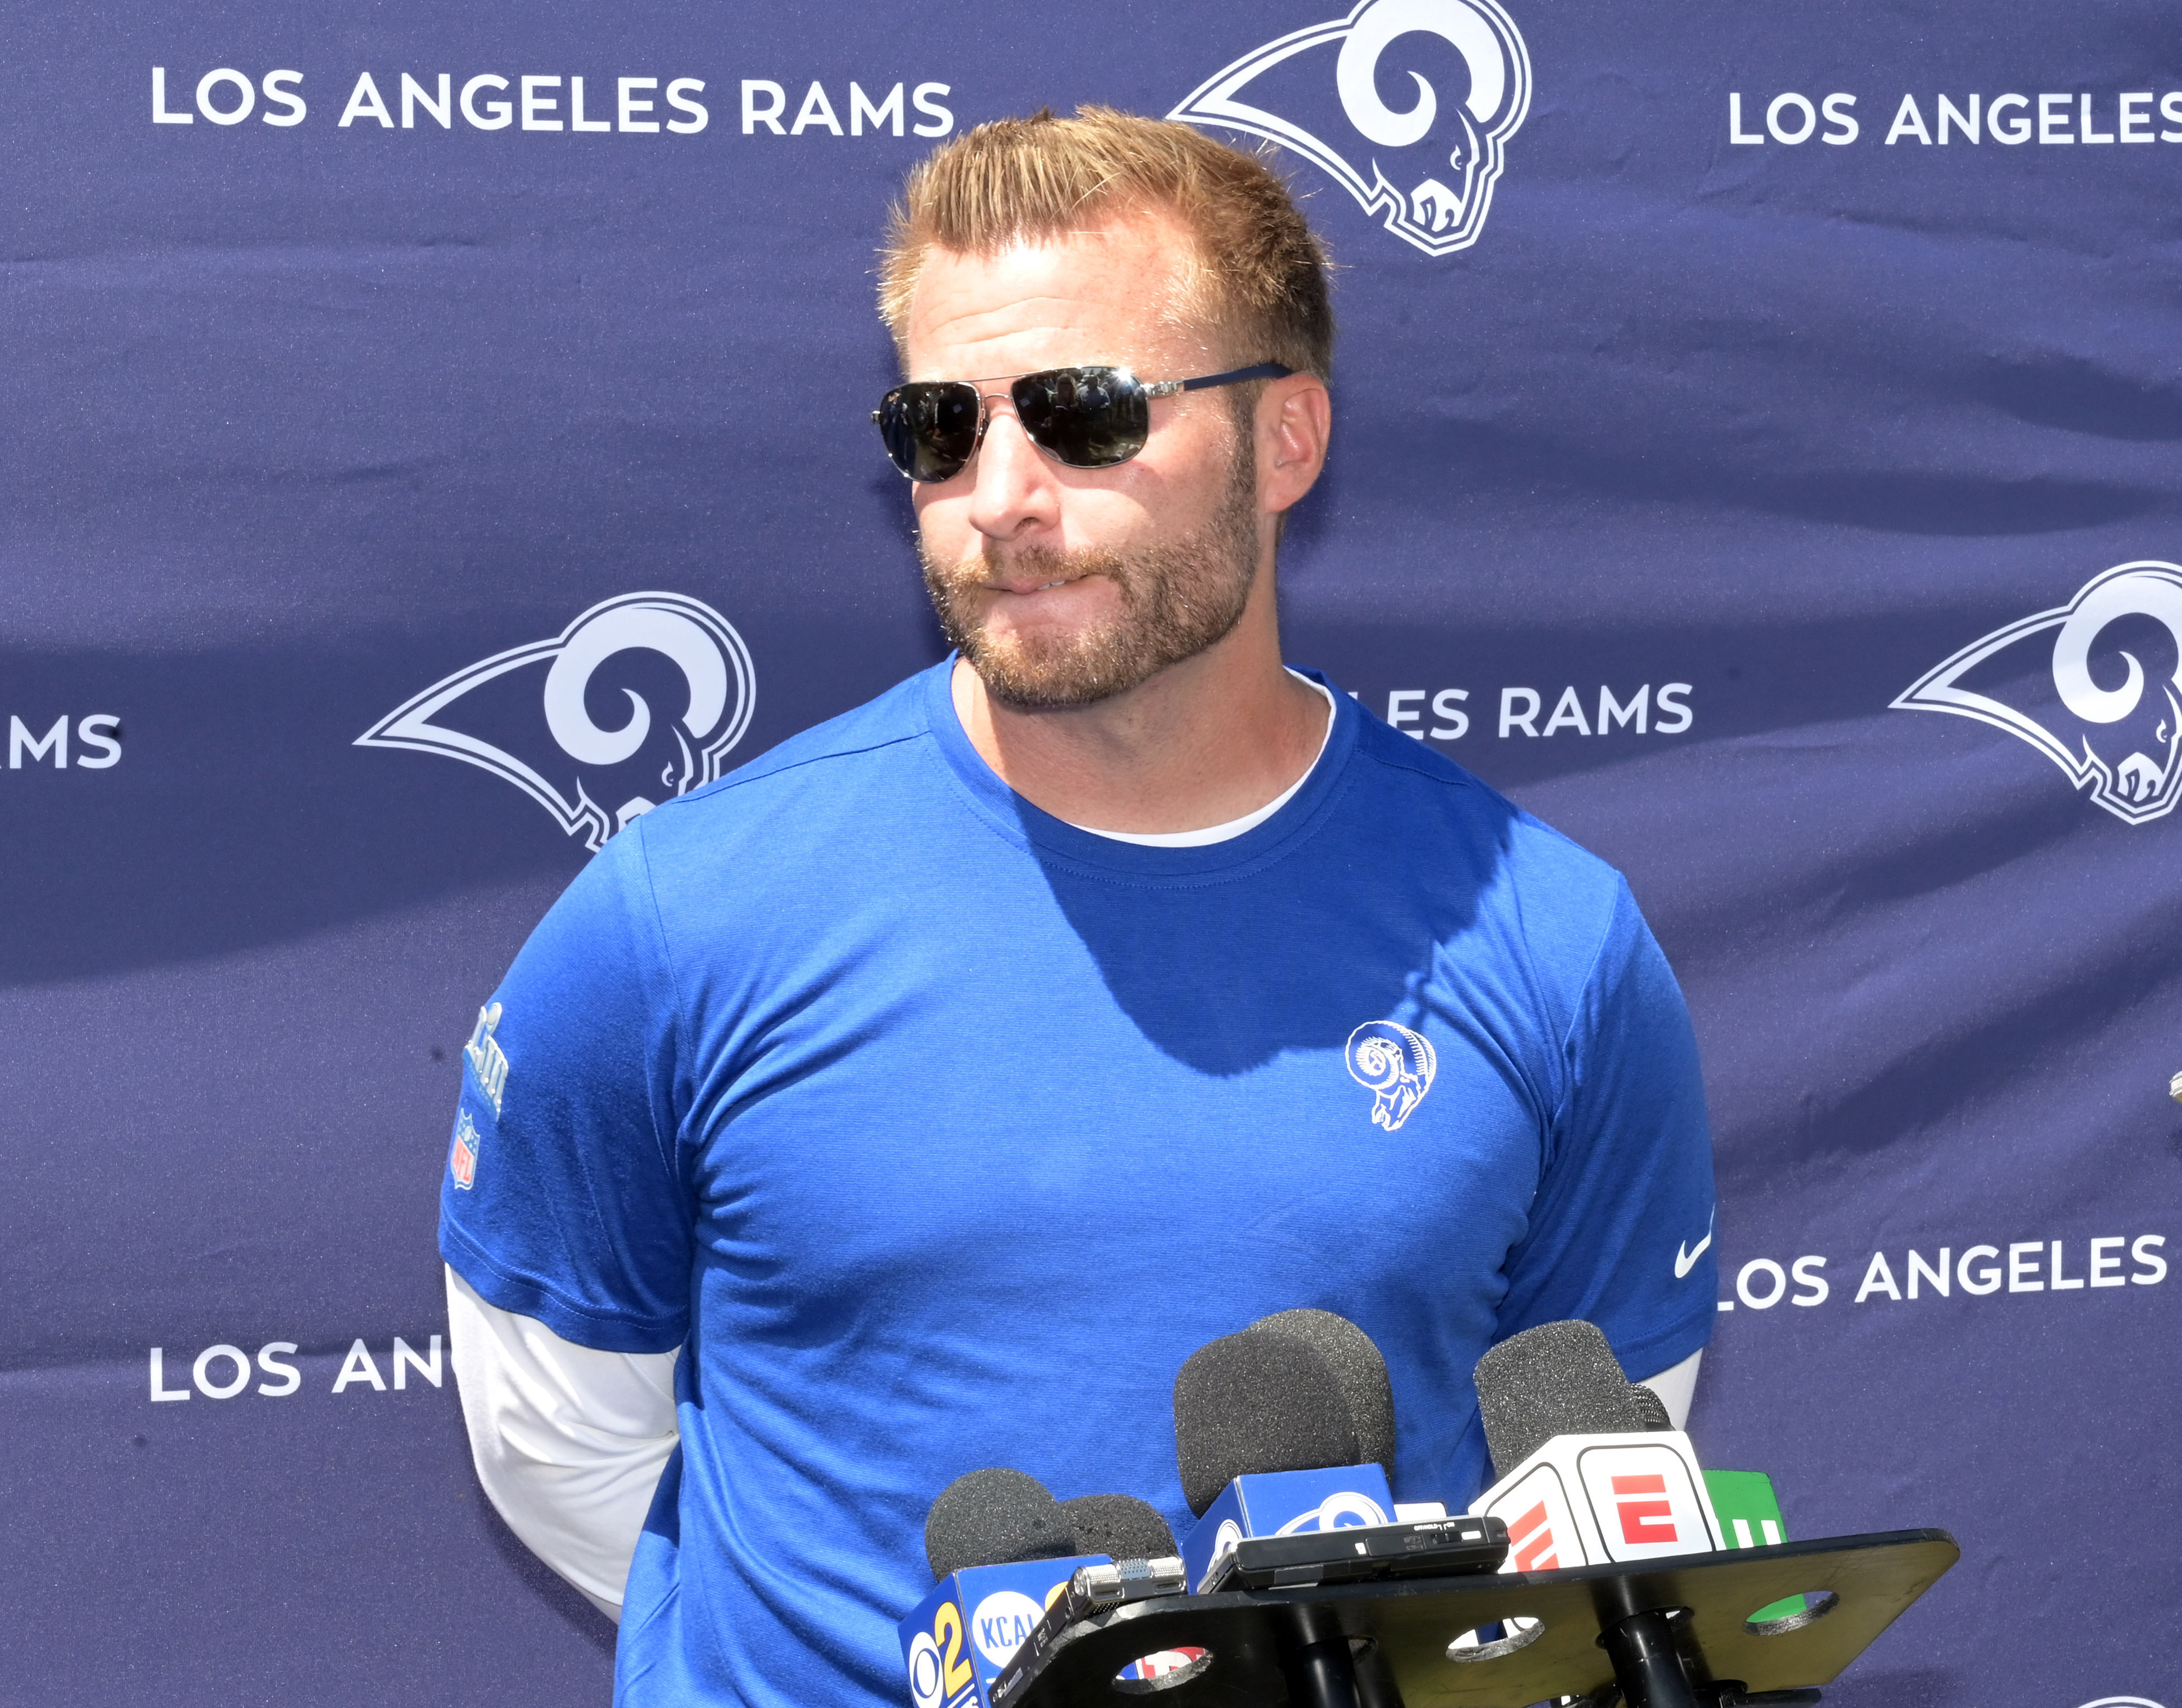 Los Angeles Rams head coach Sean McVay addresses the media at a press conference during a training camp joint practice against the Oakland Raiders, Aug. 7, 2019.